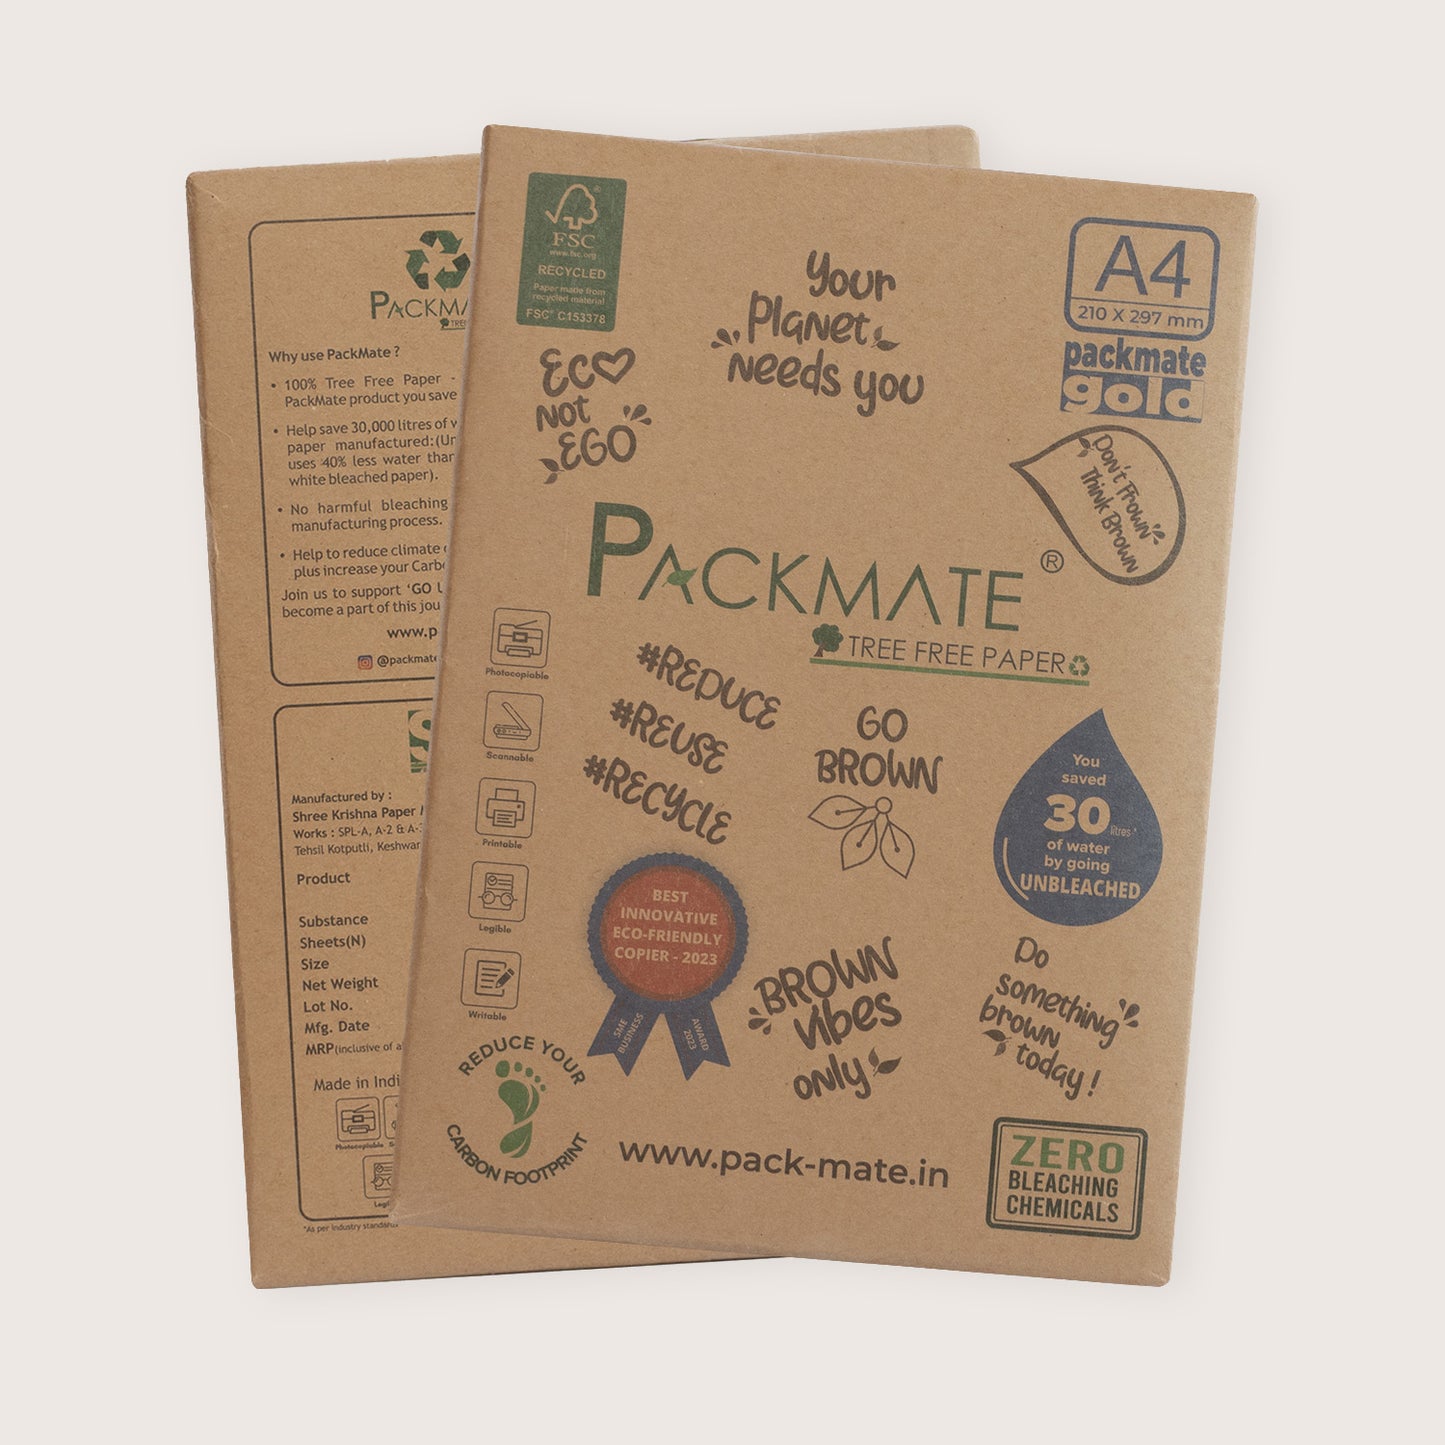 Packmate Gold Copier (A4 - 500 Sheets)  Made From 100% Recycled Paper